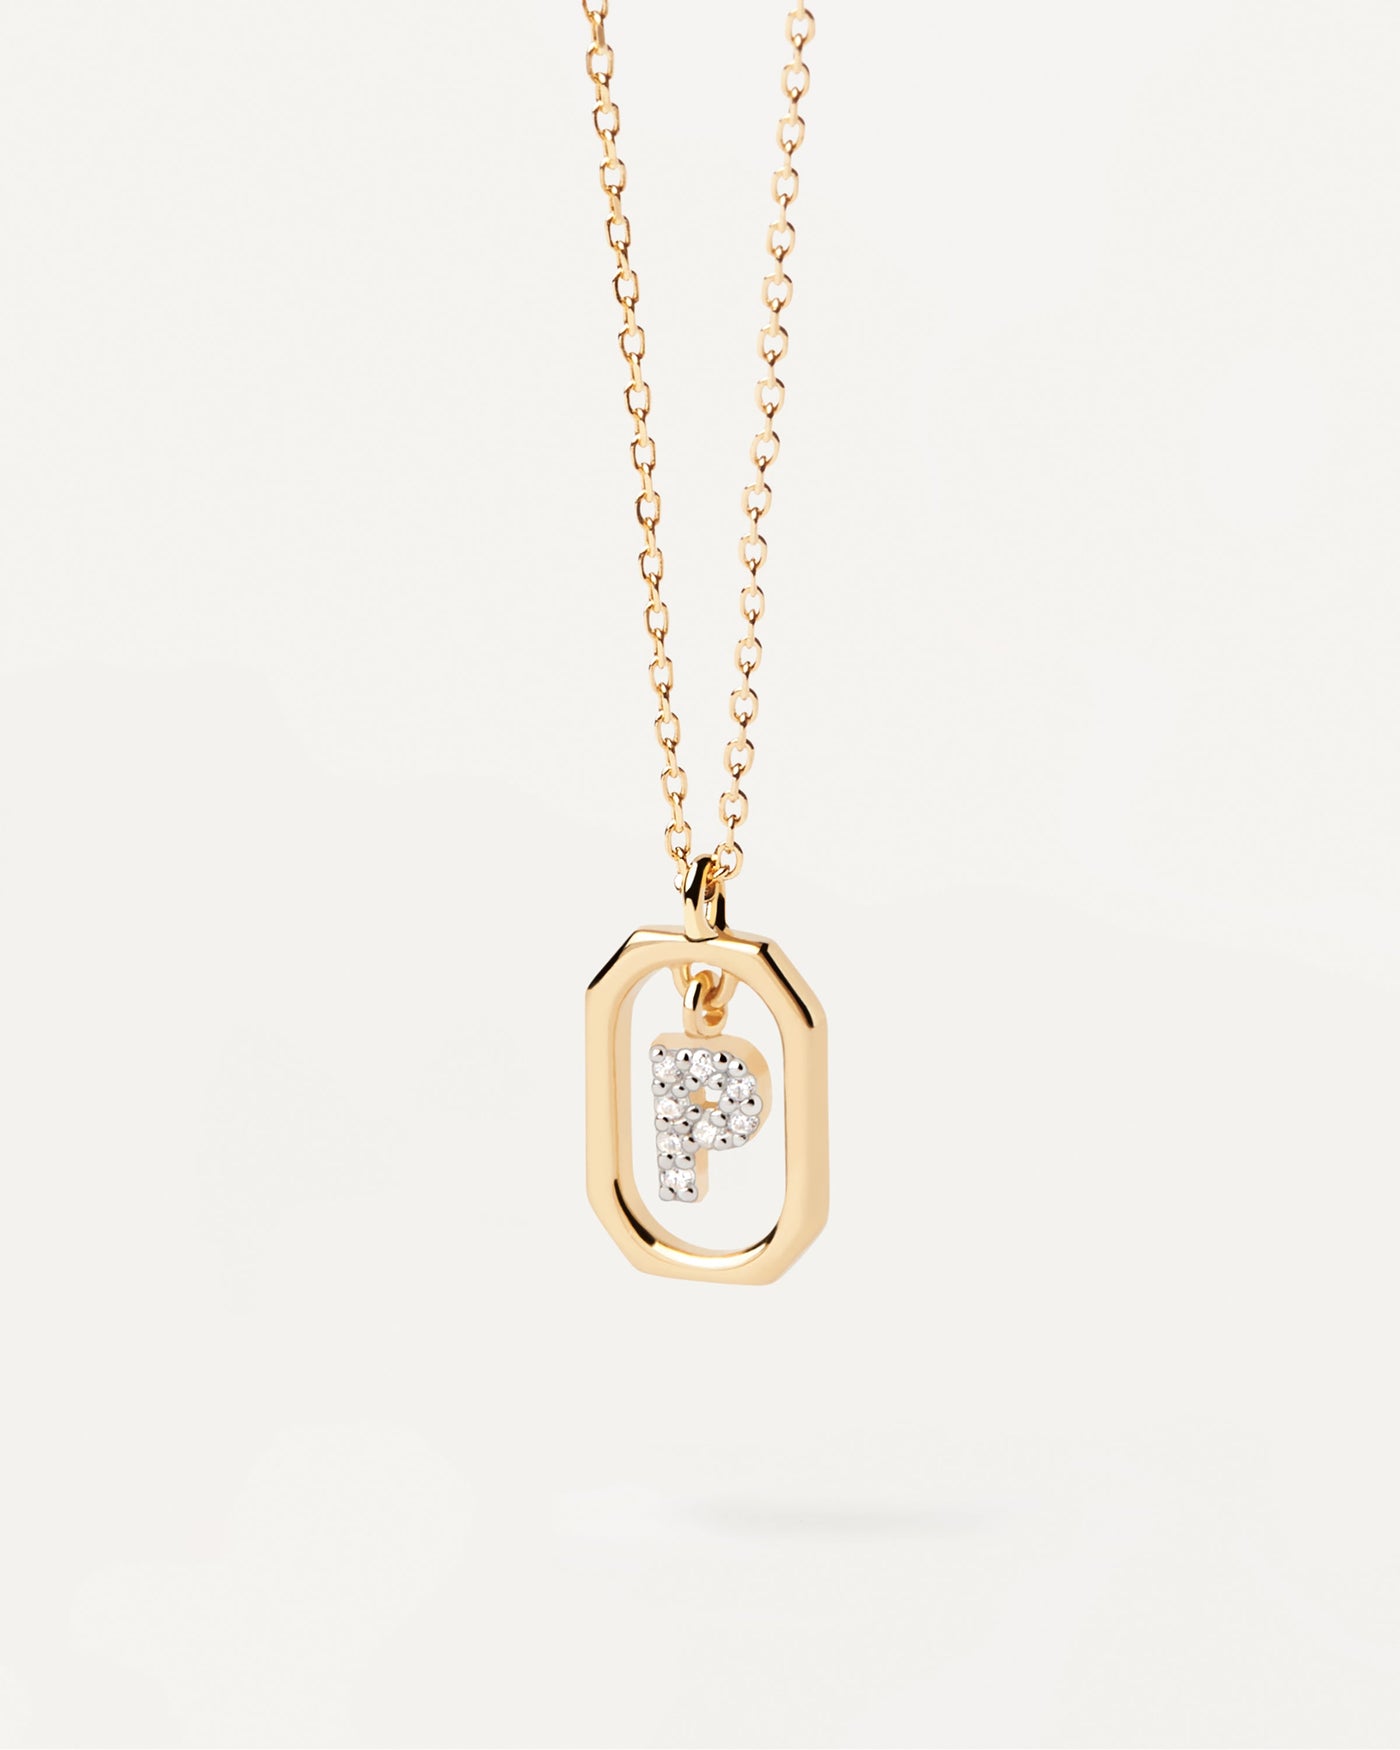 2023 Selection | Mini Letter P Necklace. Small initial P necklace in zirconia inside gold-plated silver octagonal pendant. Get the latest arrival from PDPAOLA. Place your order safely and get this Best Seller. Free Shipping.